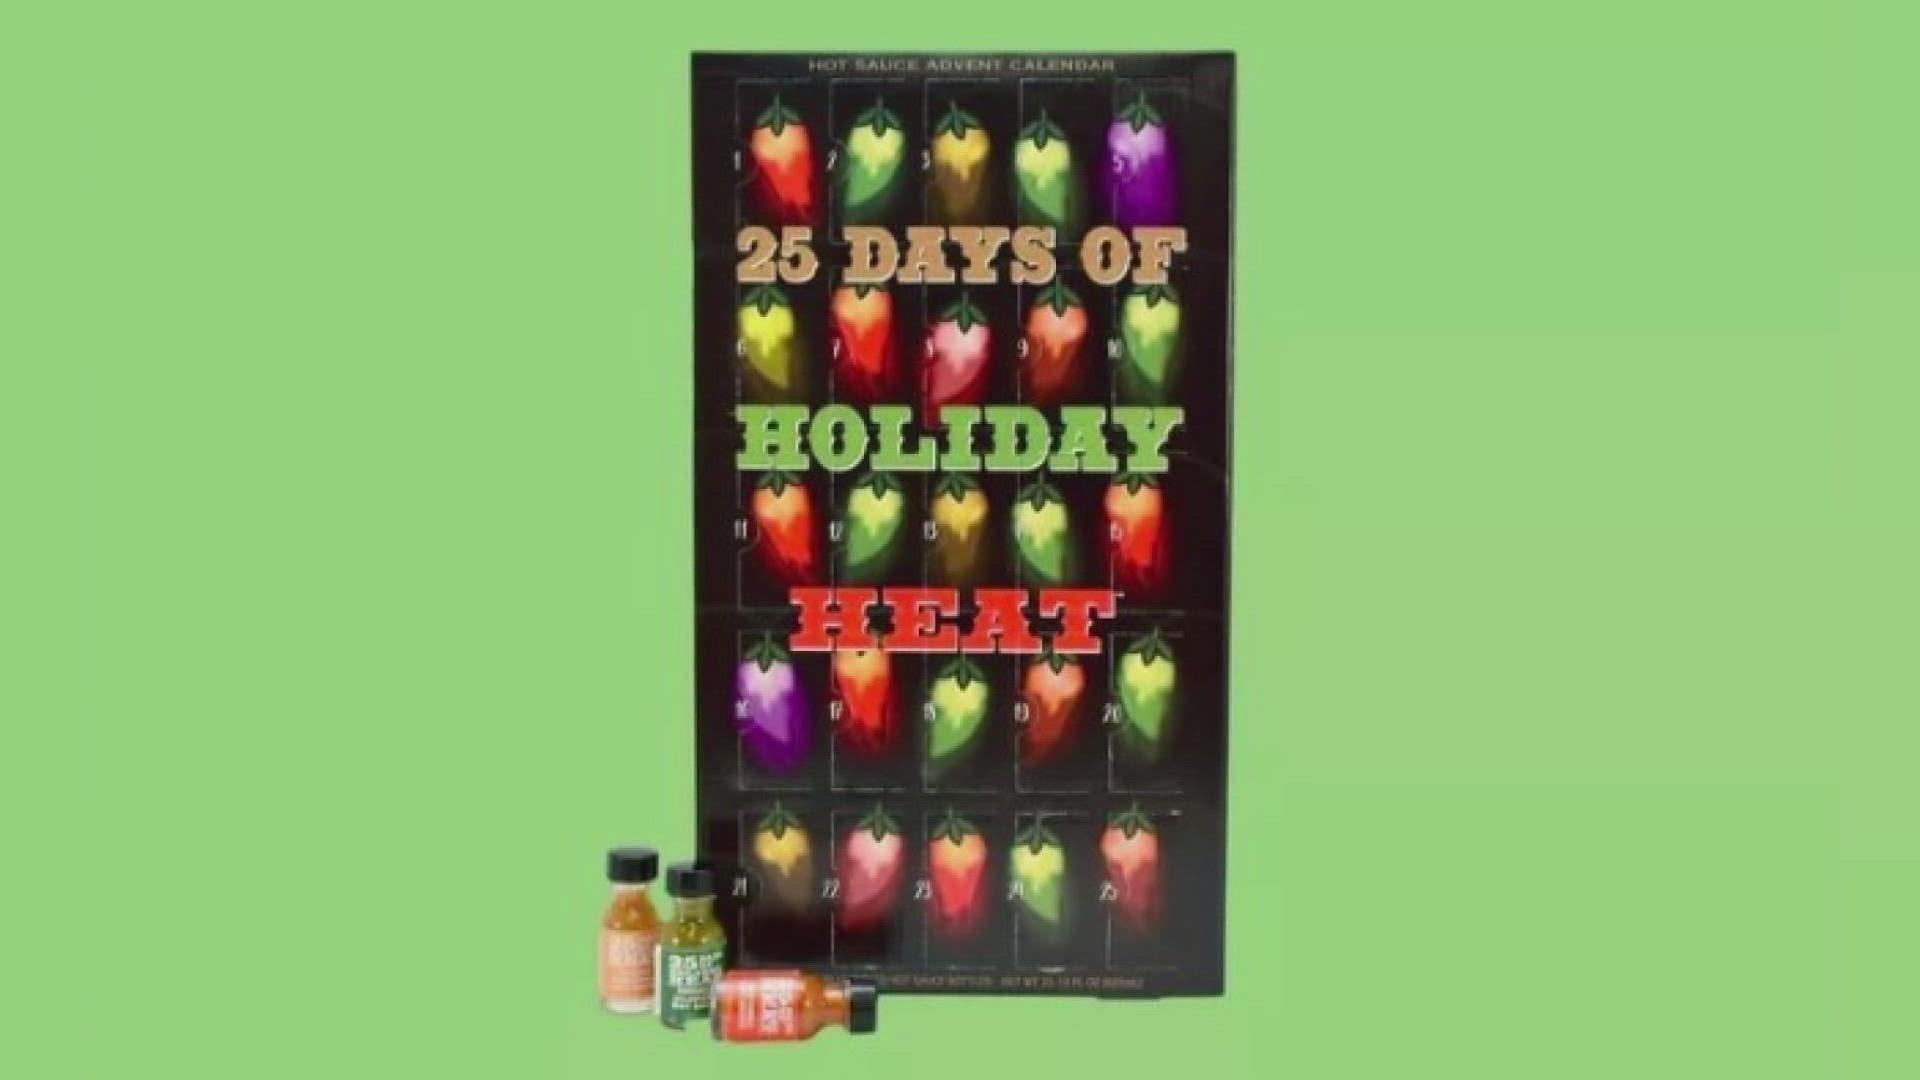 It features 25 days of "holiday heat" which include a small bottle of hot sauce for each day.